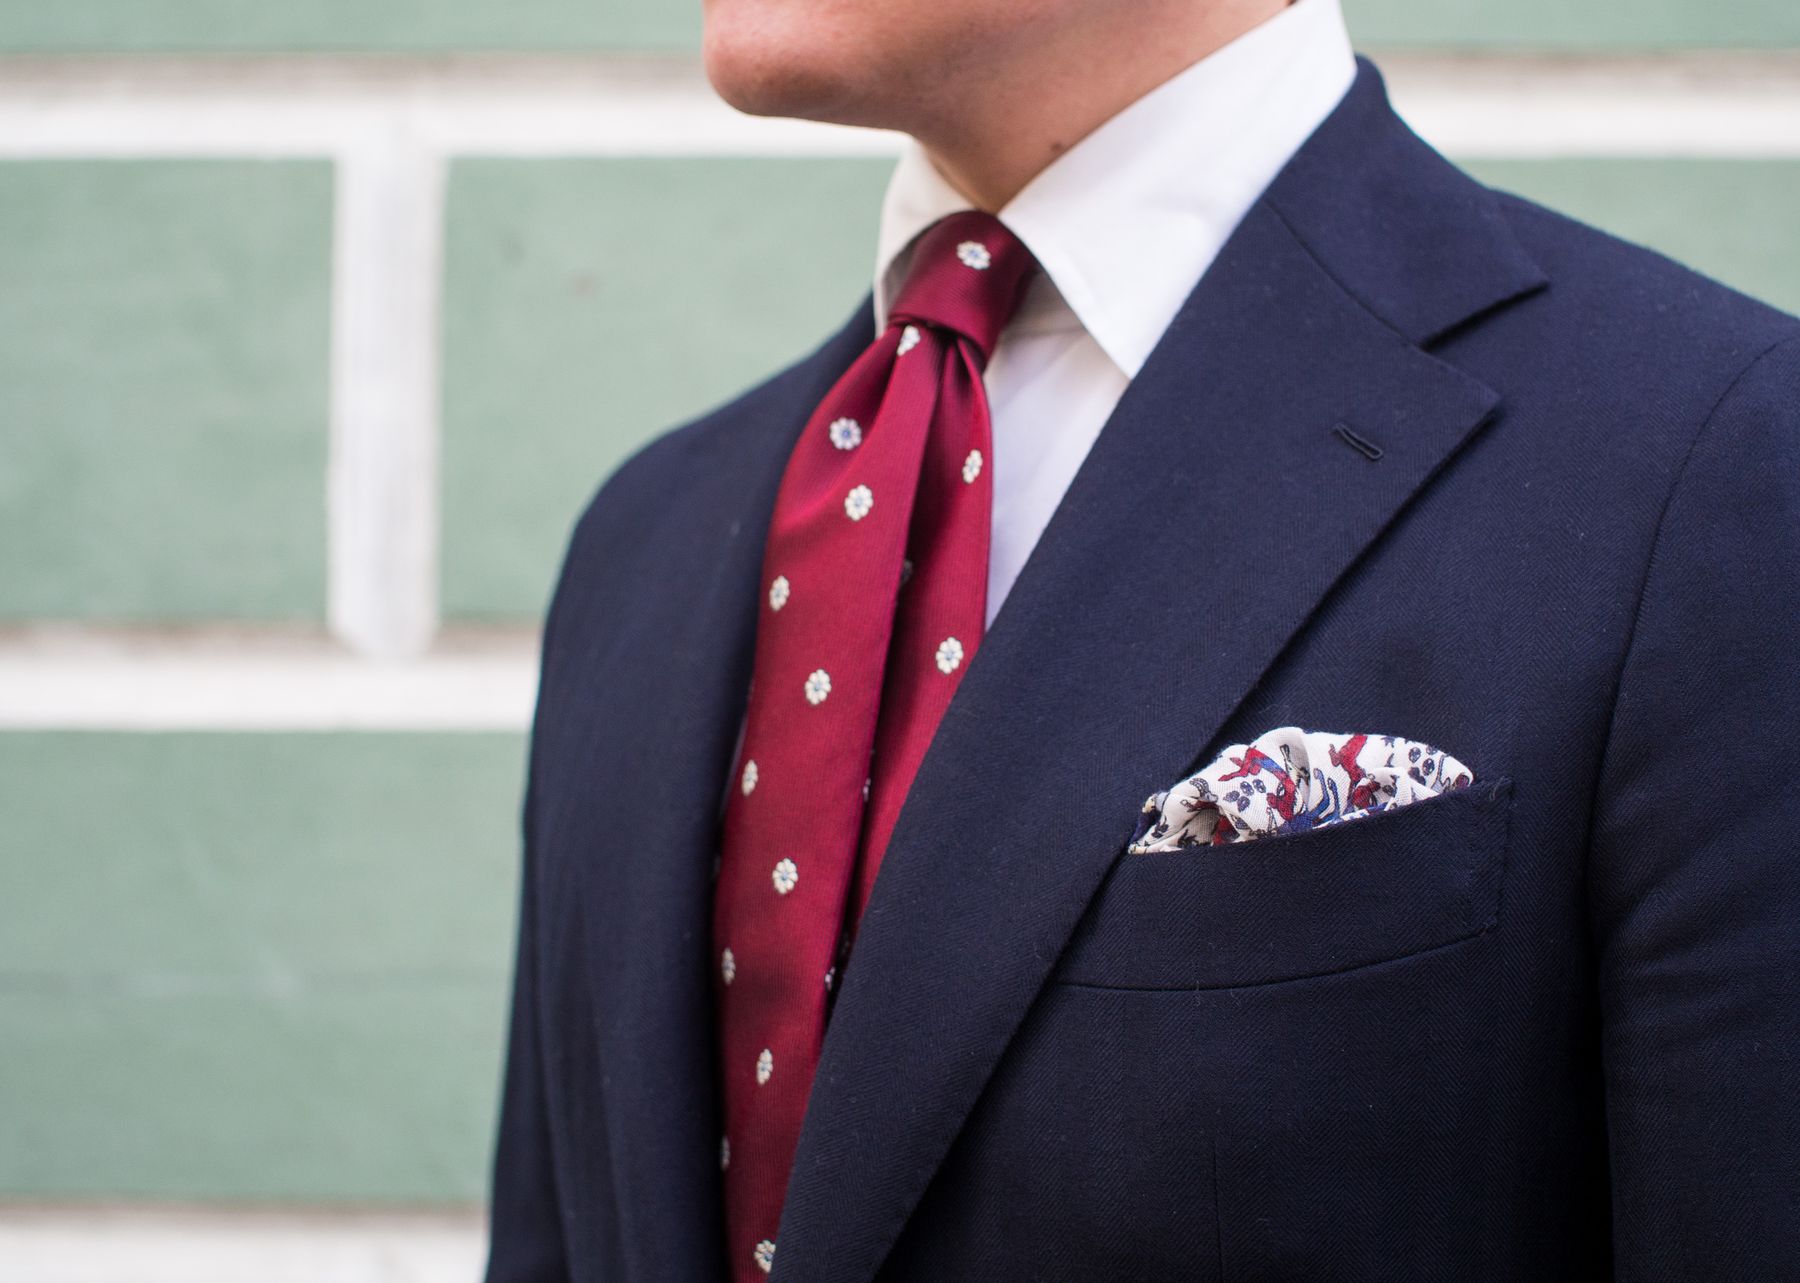 råolie flamme betale When To Wear a Red Tie - Ultimate Guide by GentWith Blog